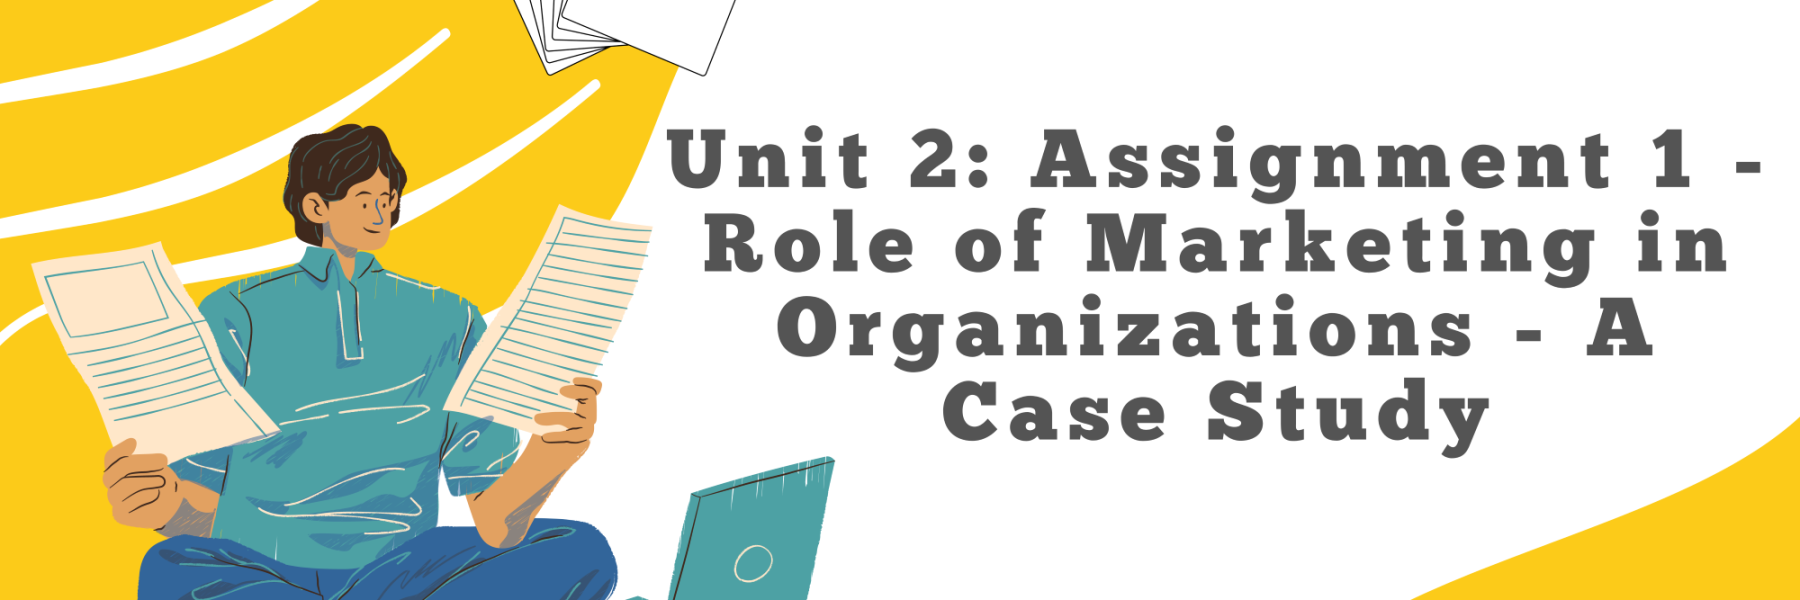 Unit 2: Assignment 1 - Role of marketing in organizations - case study